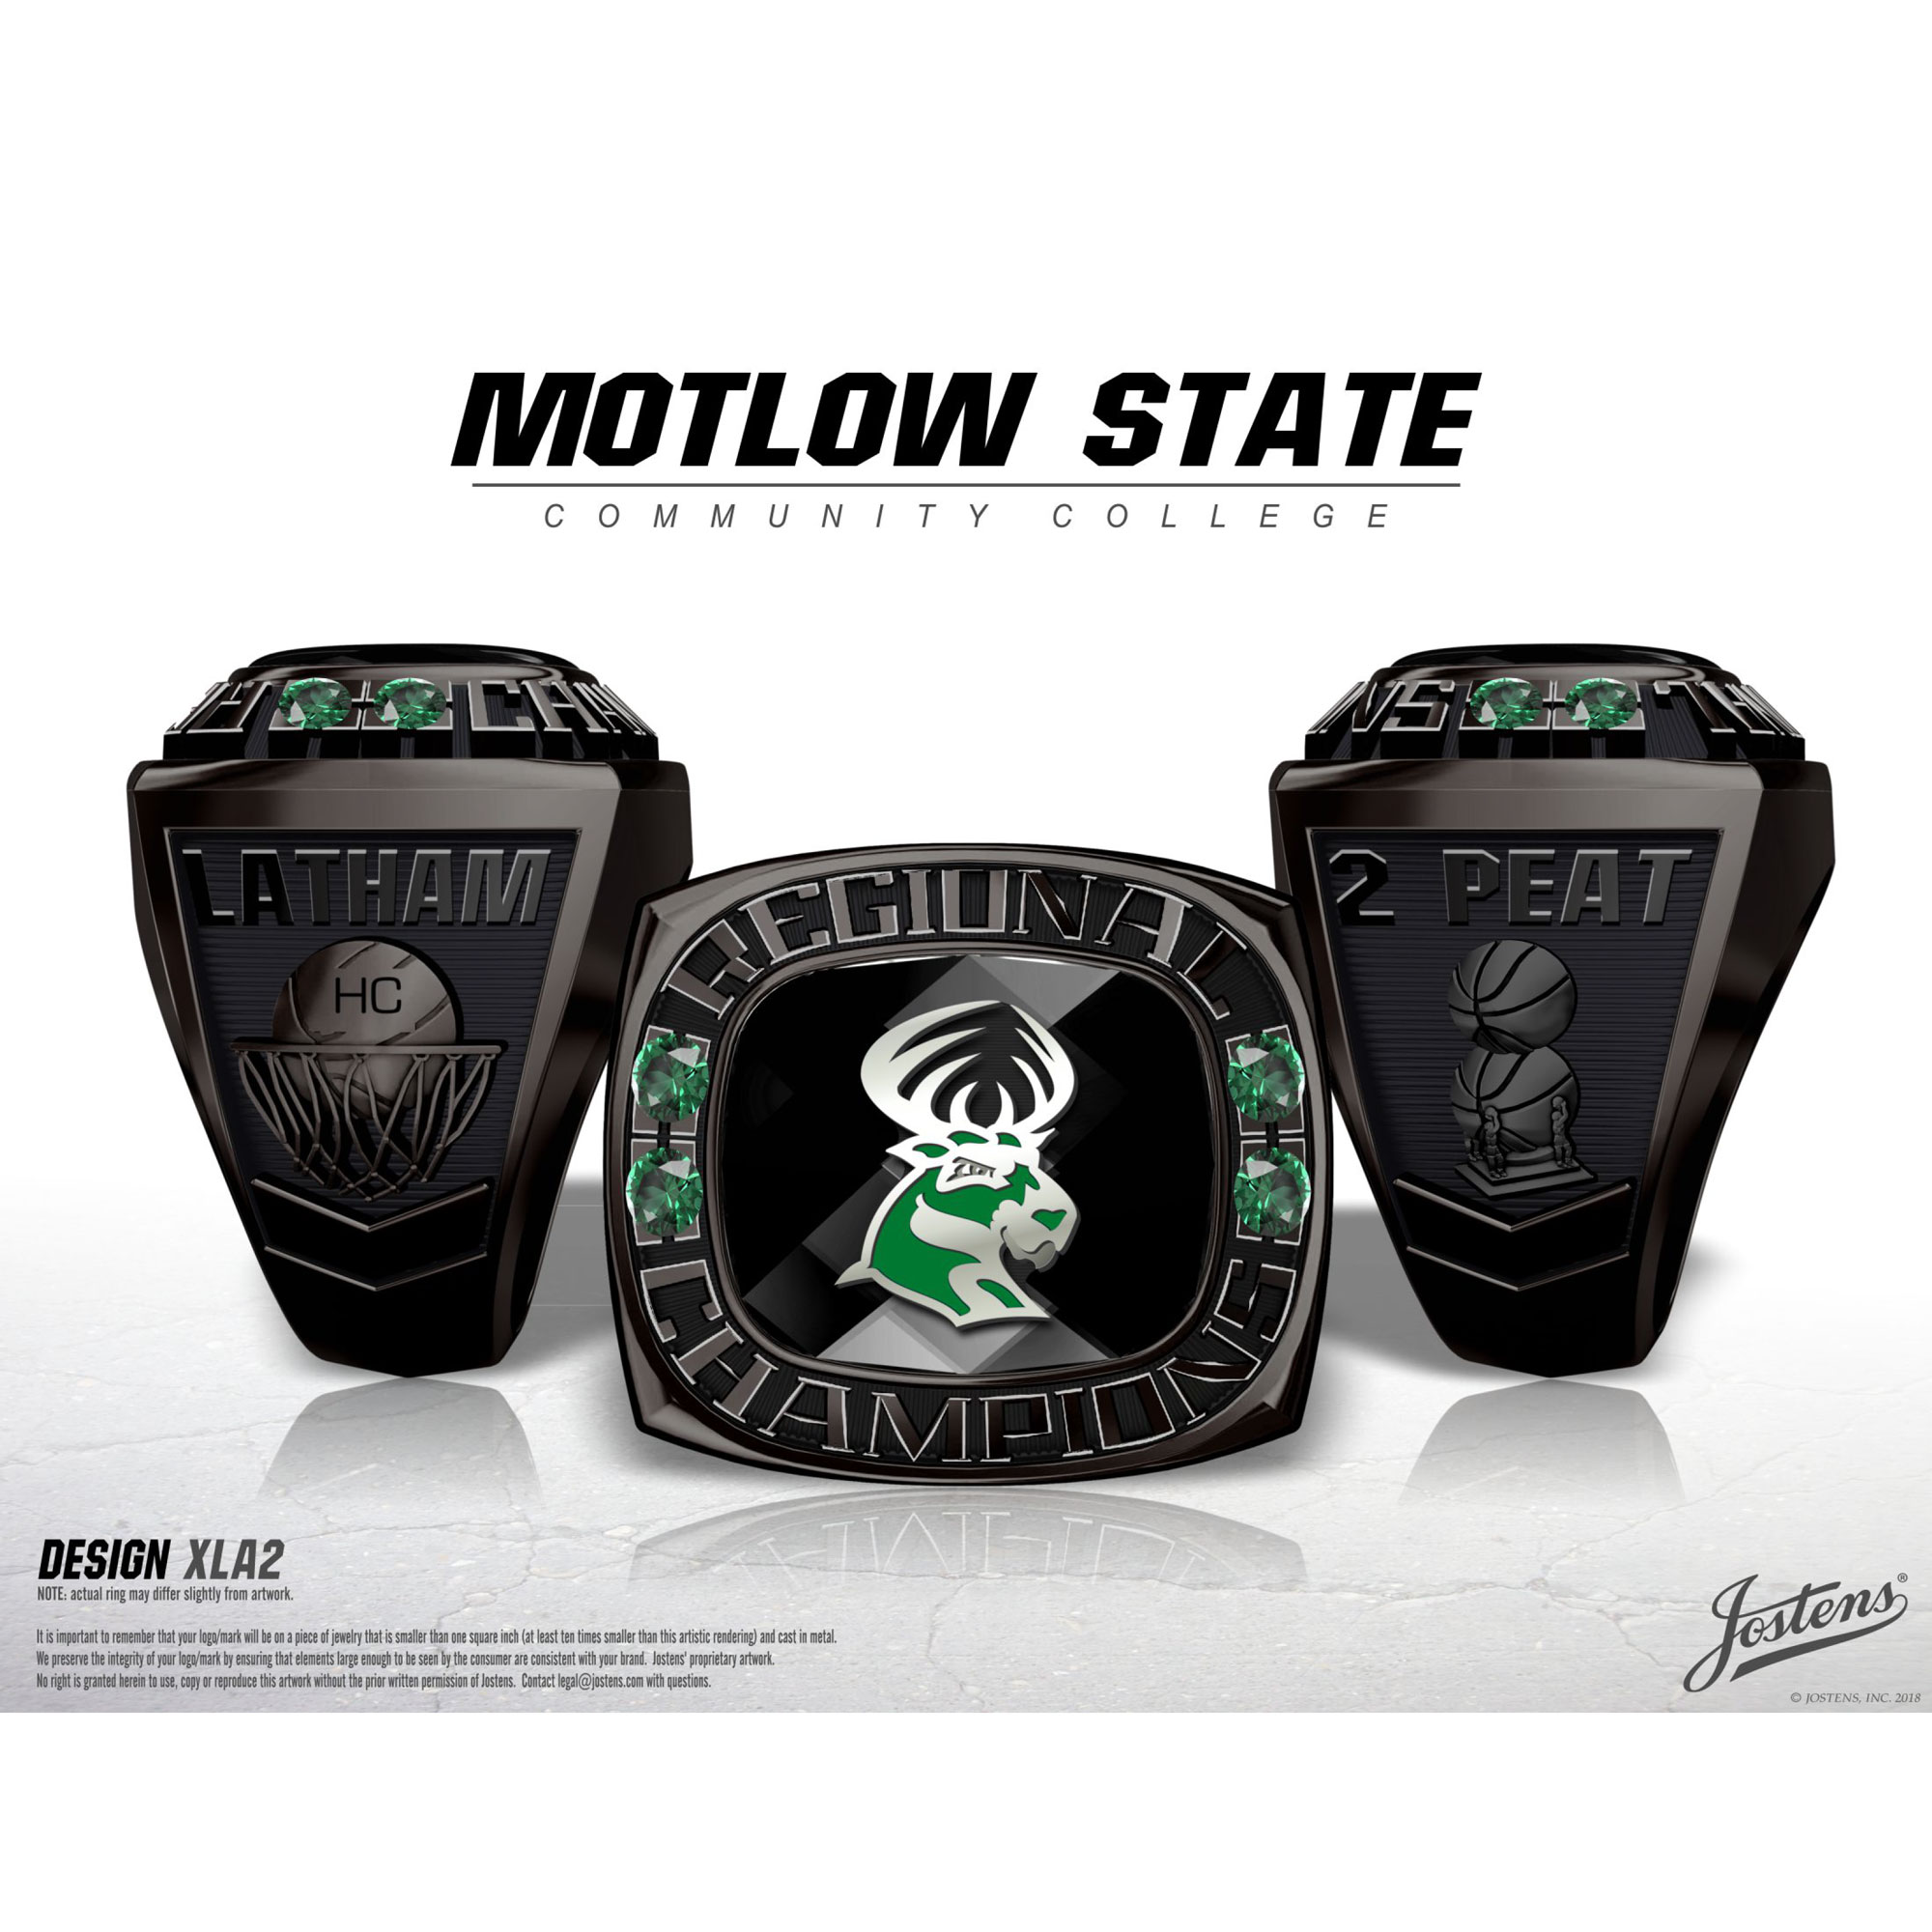 Motlow State Community College Men's Basketball 2018 Conference Championship Ring